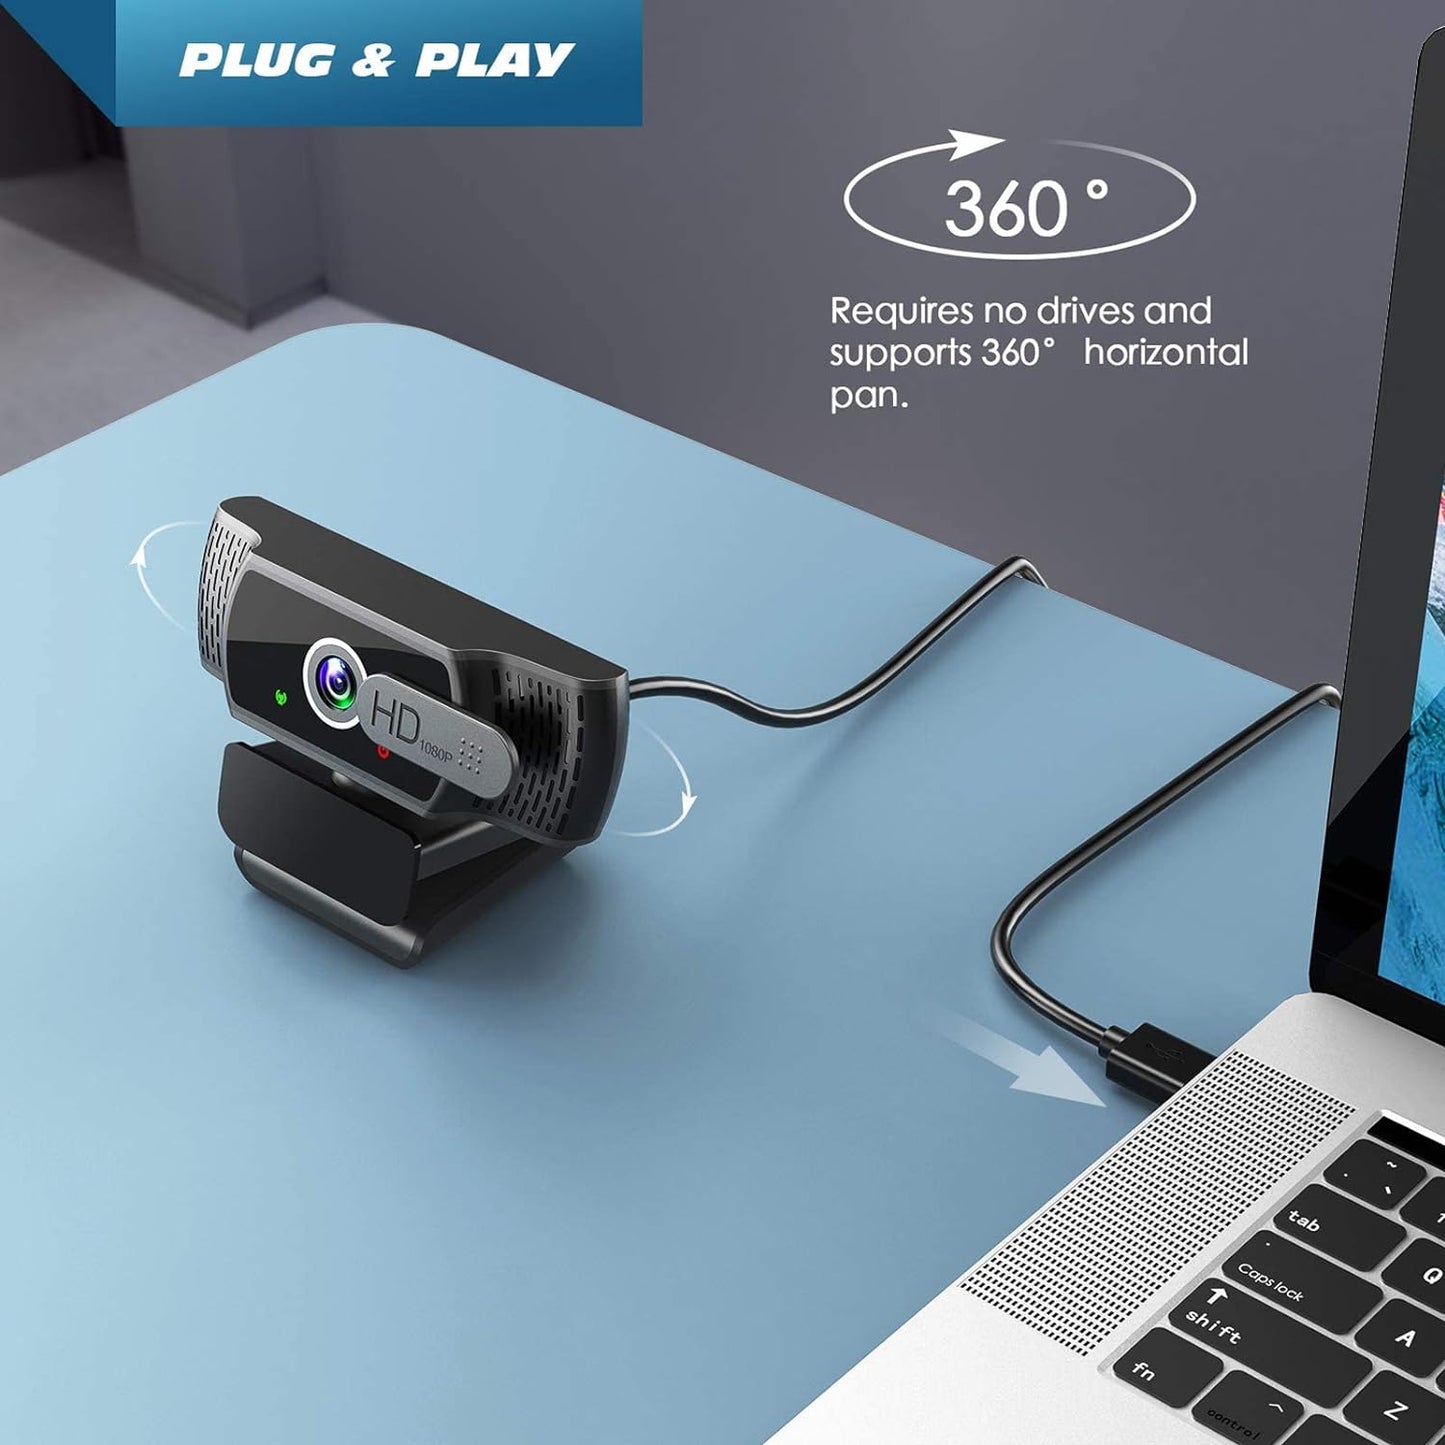 "Crystal Clear 1080P FHD Webcam with Privacy Cover and Mounts - Perfect for Video Conferences on PC and Laptop!"